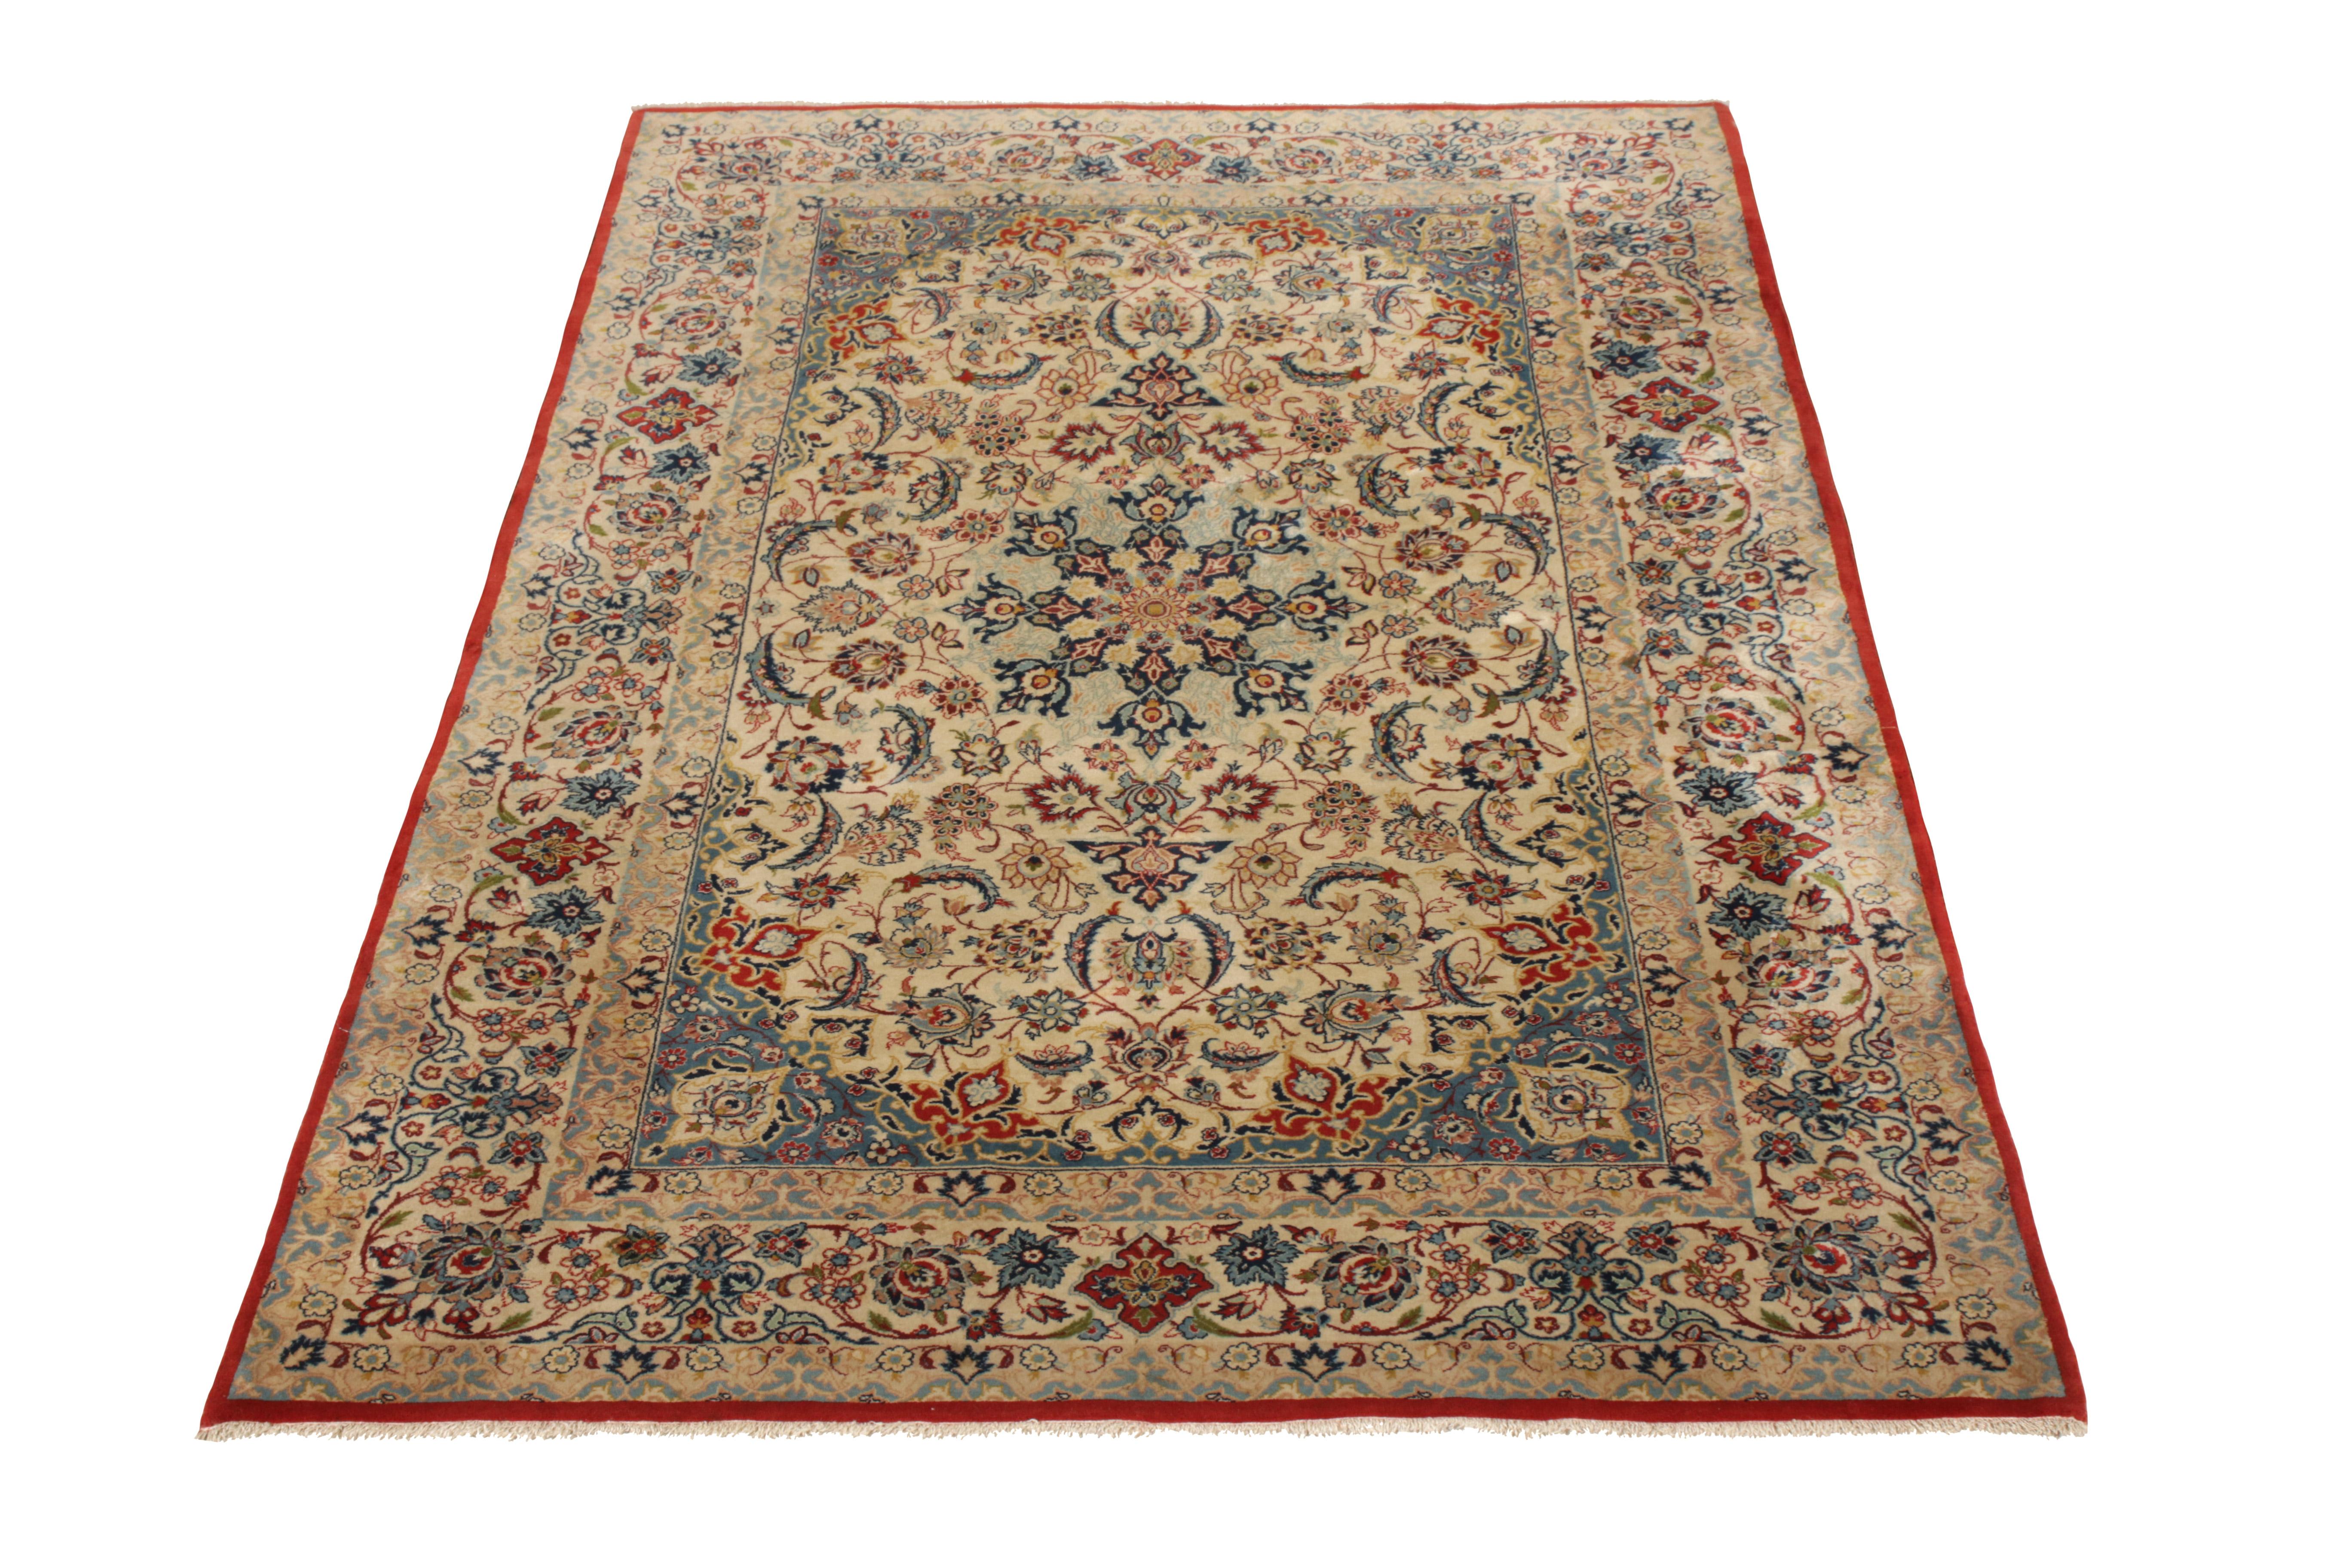 Tribal Vintage Isfahan Rug in Beige Blue and Red Persian Floral Pattern by Rug & Kilim For Sale